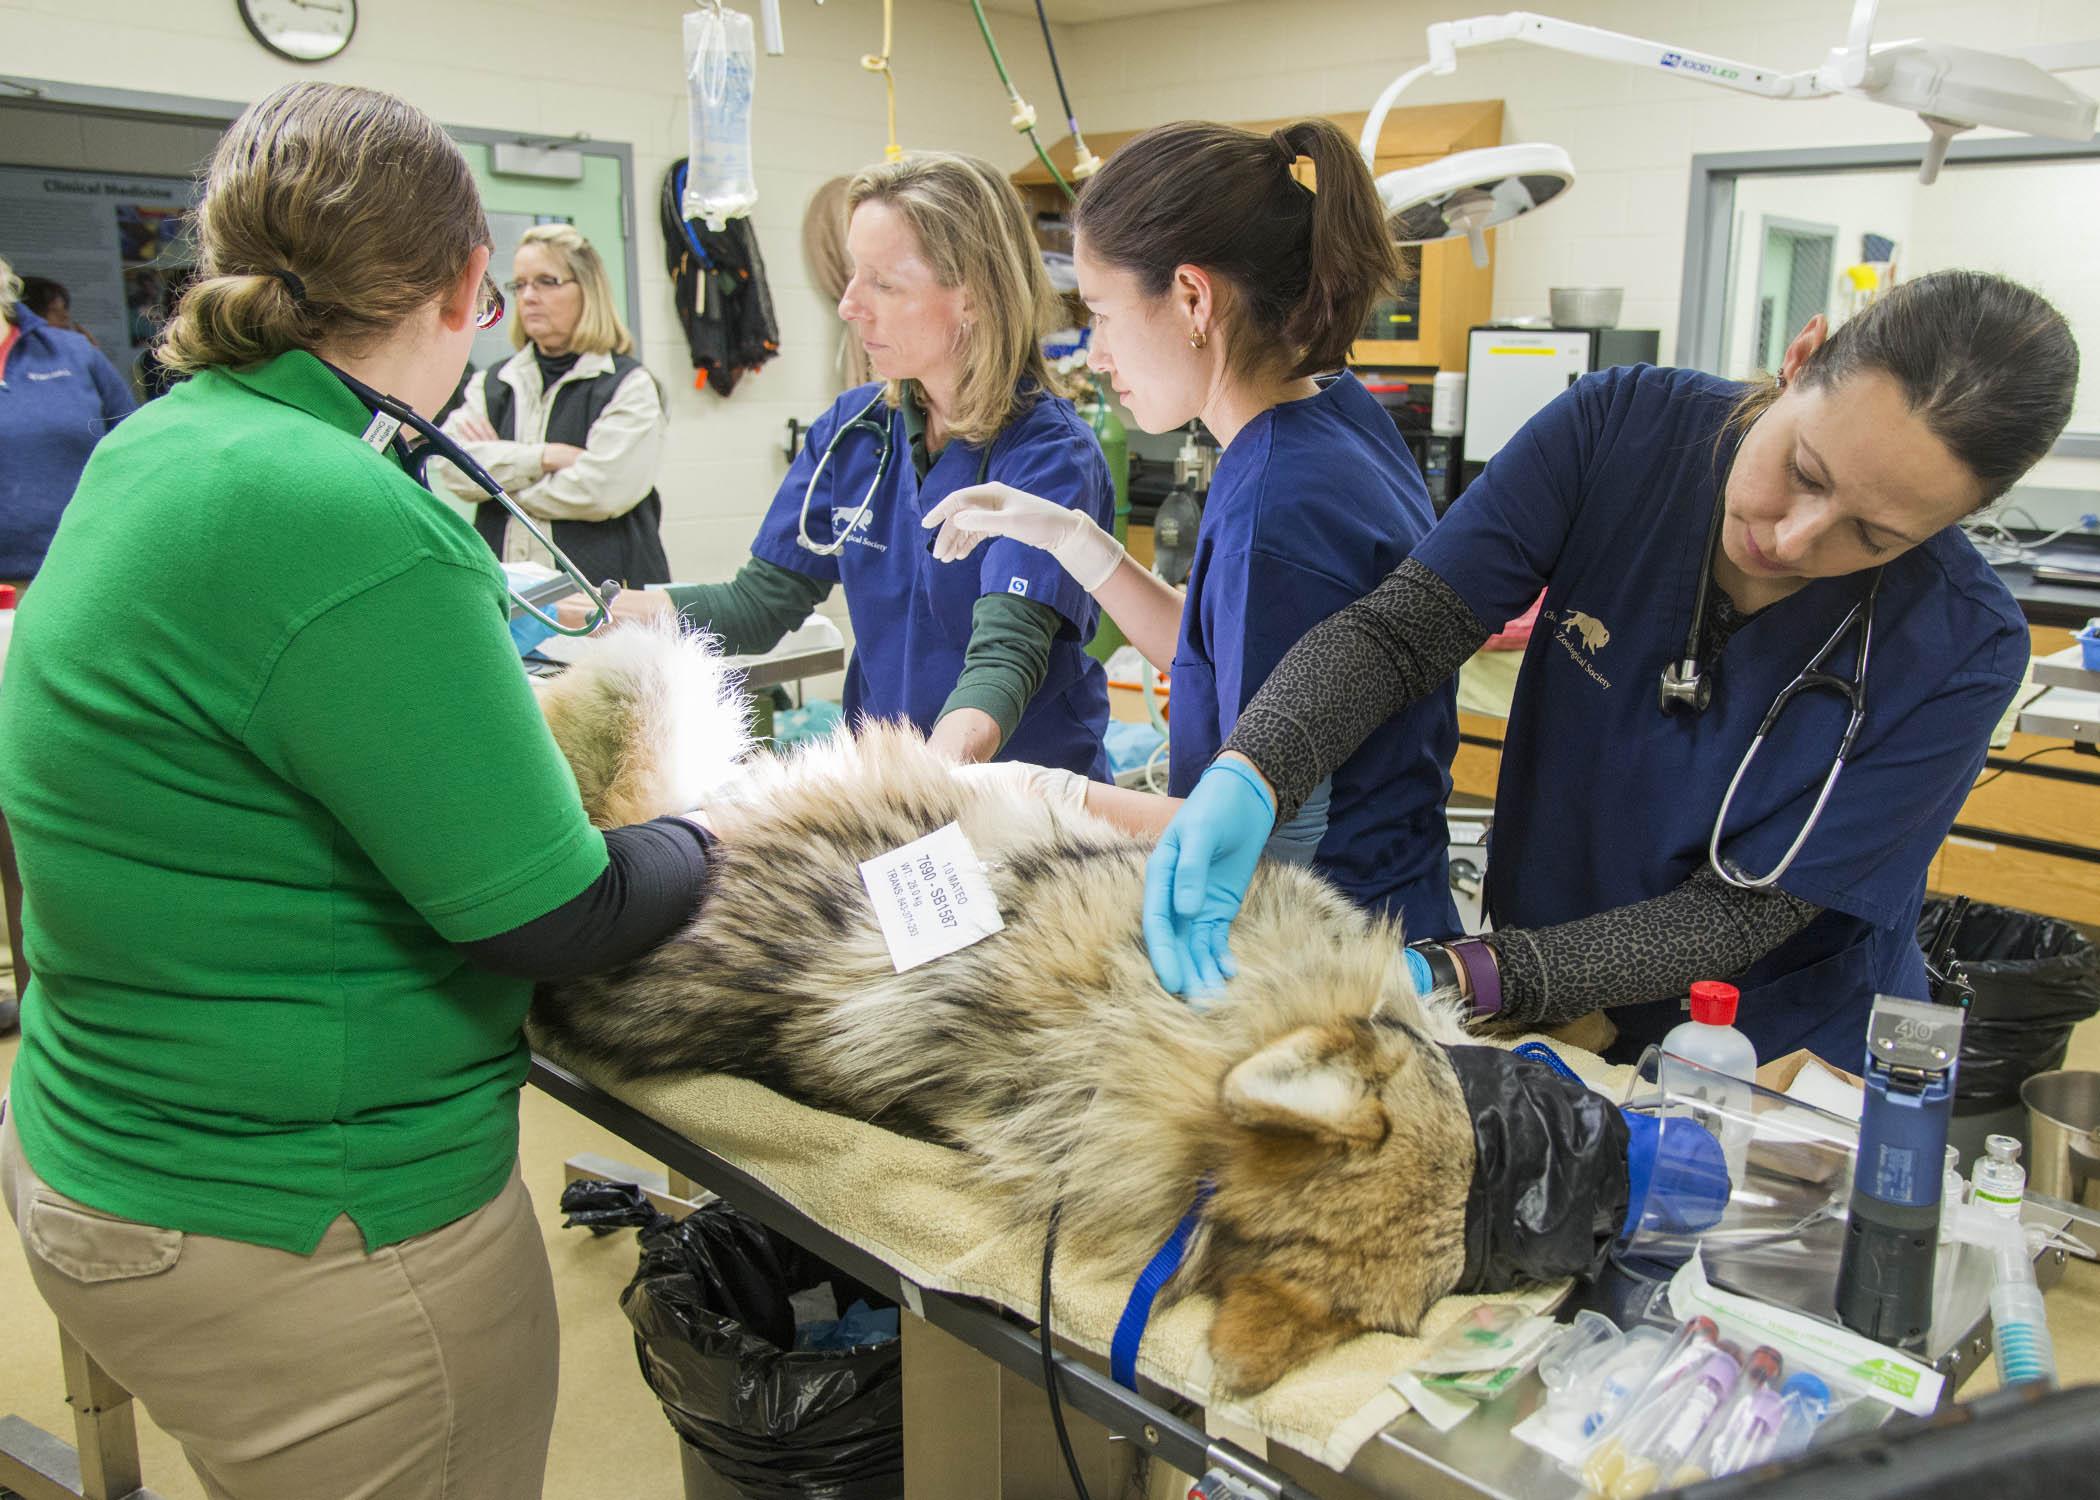 Veterinary staff prepare a Mexican wolf at Brookfield Zoo for a procedure in which his semen will be collected, frozen and banked for future use to help improve the genetic diversity of the population. (Courtesy Chicago Zoological Society)